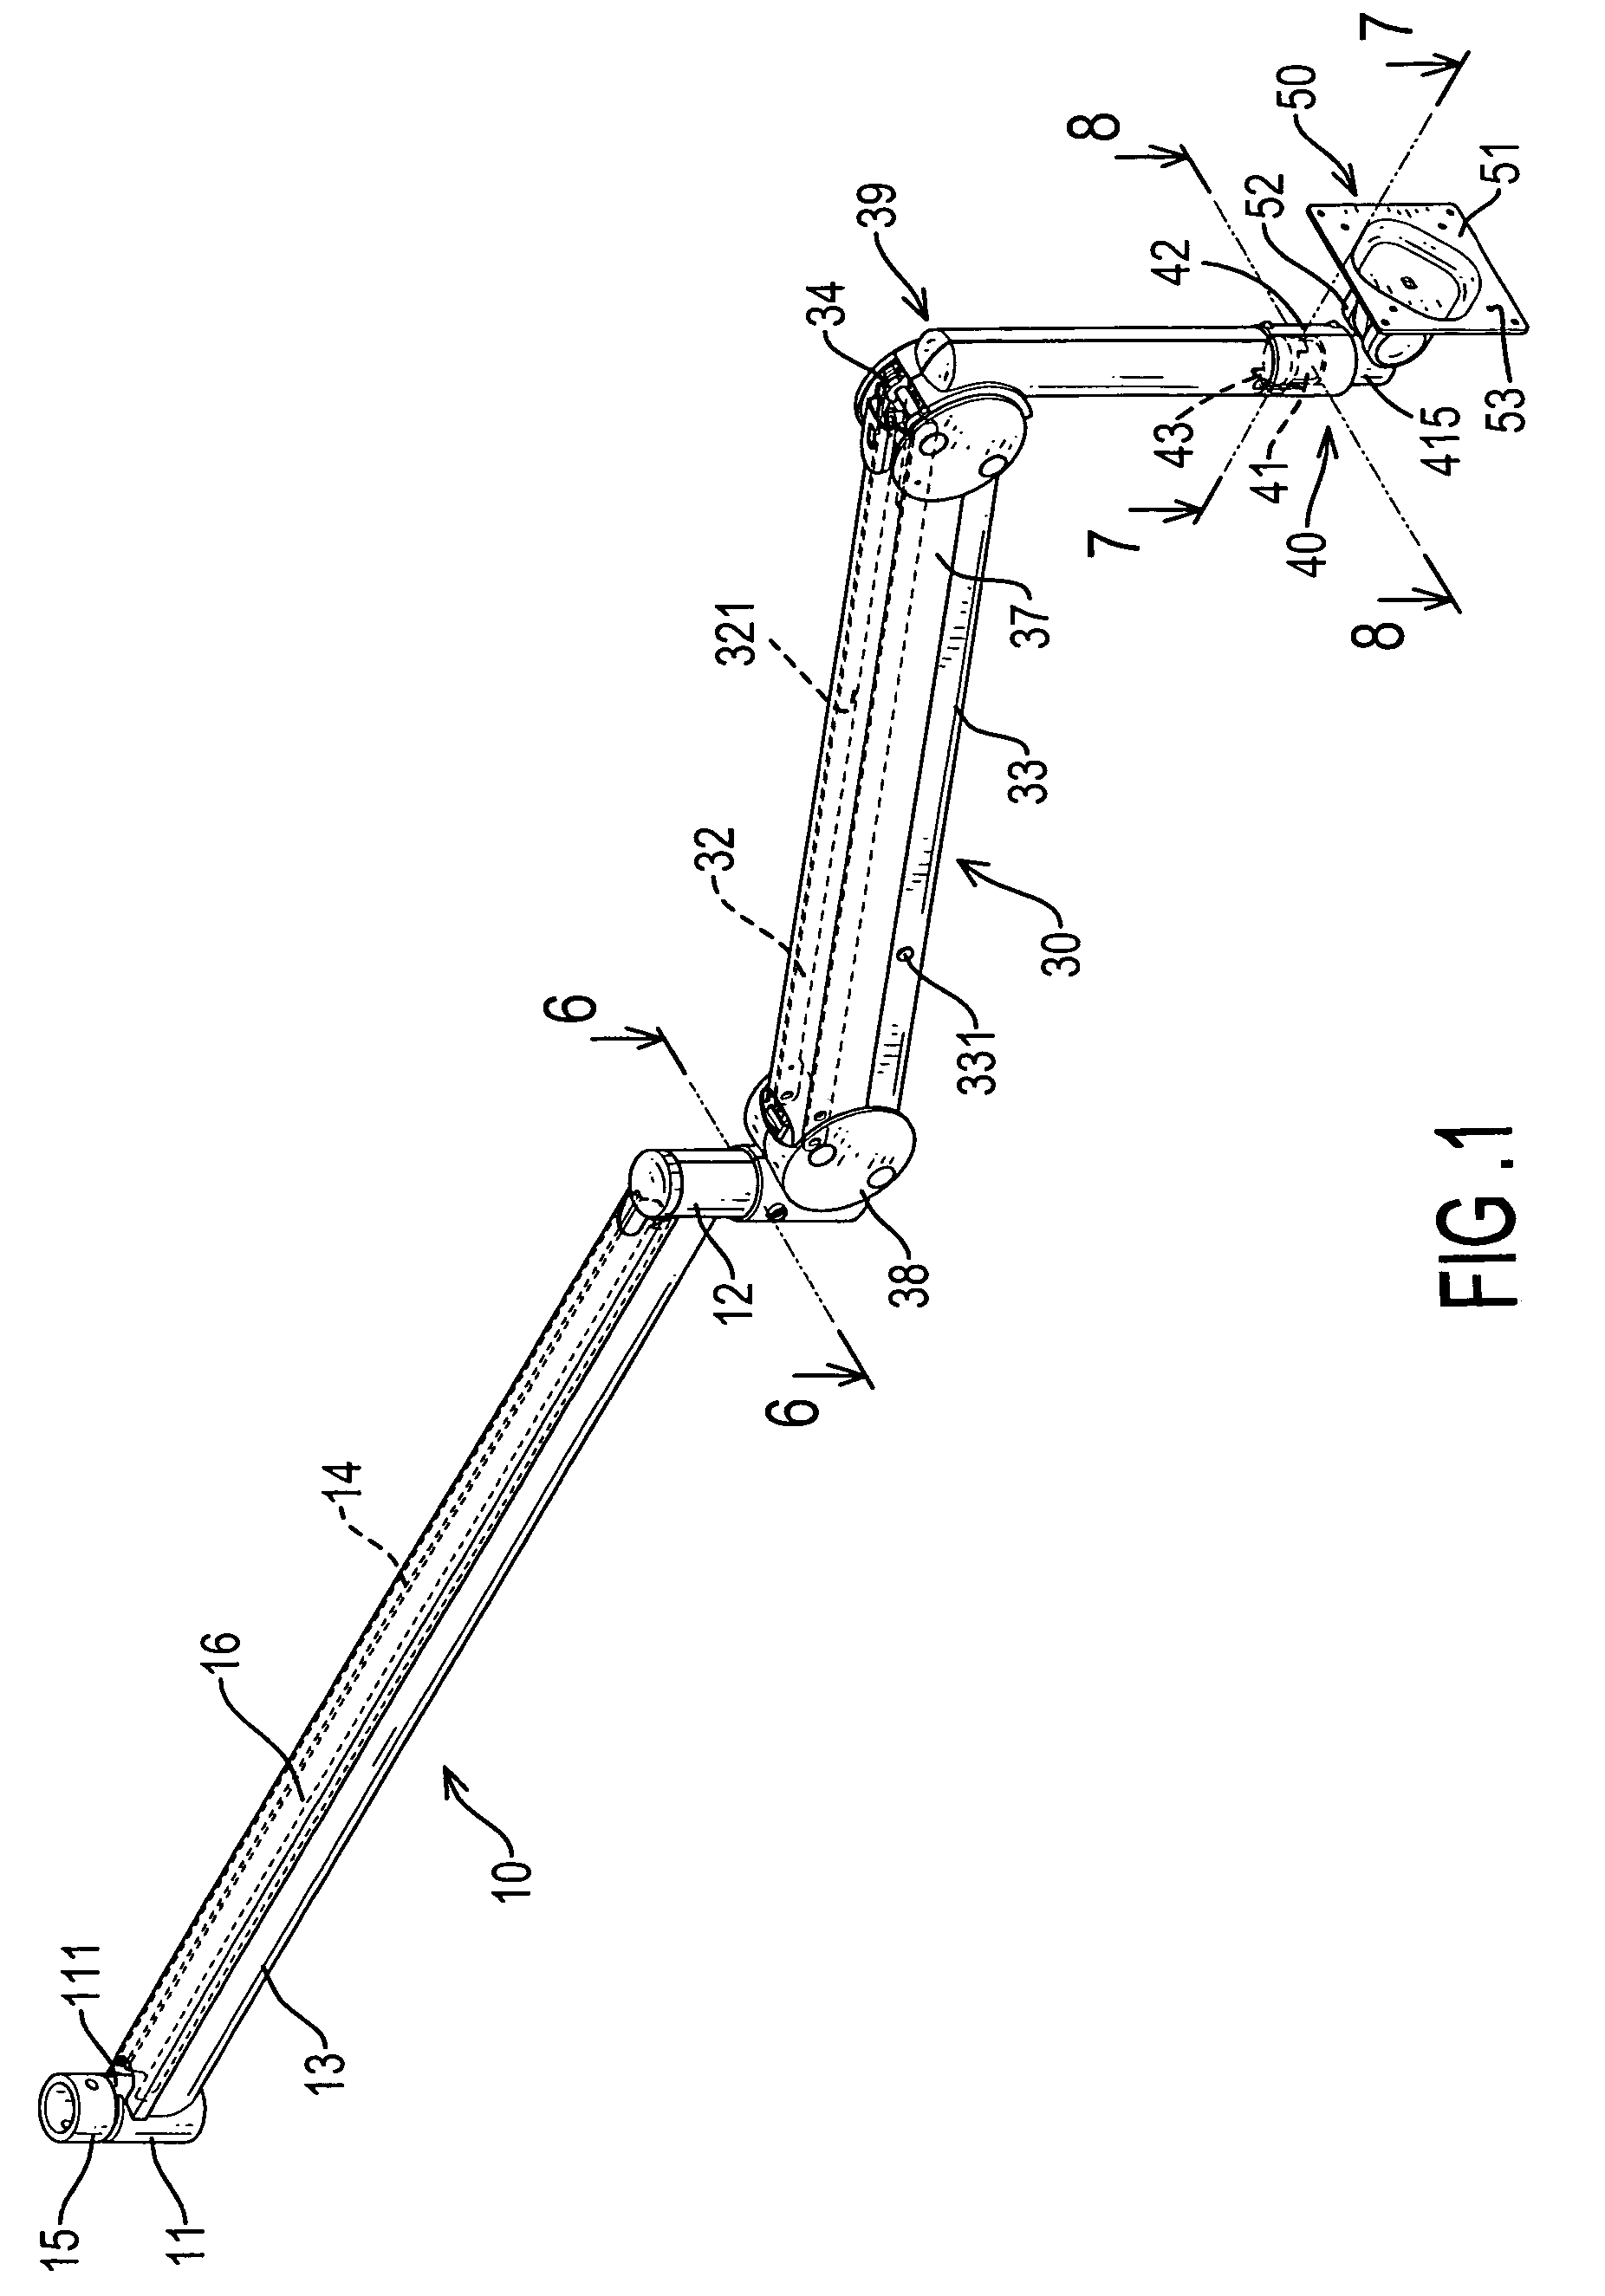 Support apparatus for suspending a display